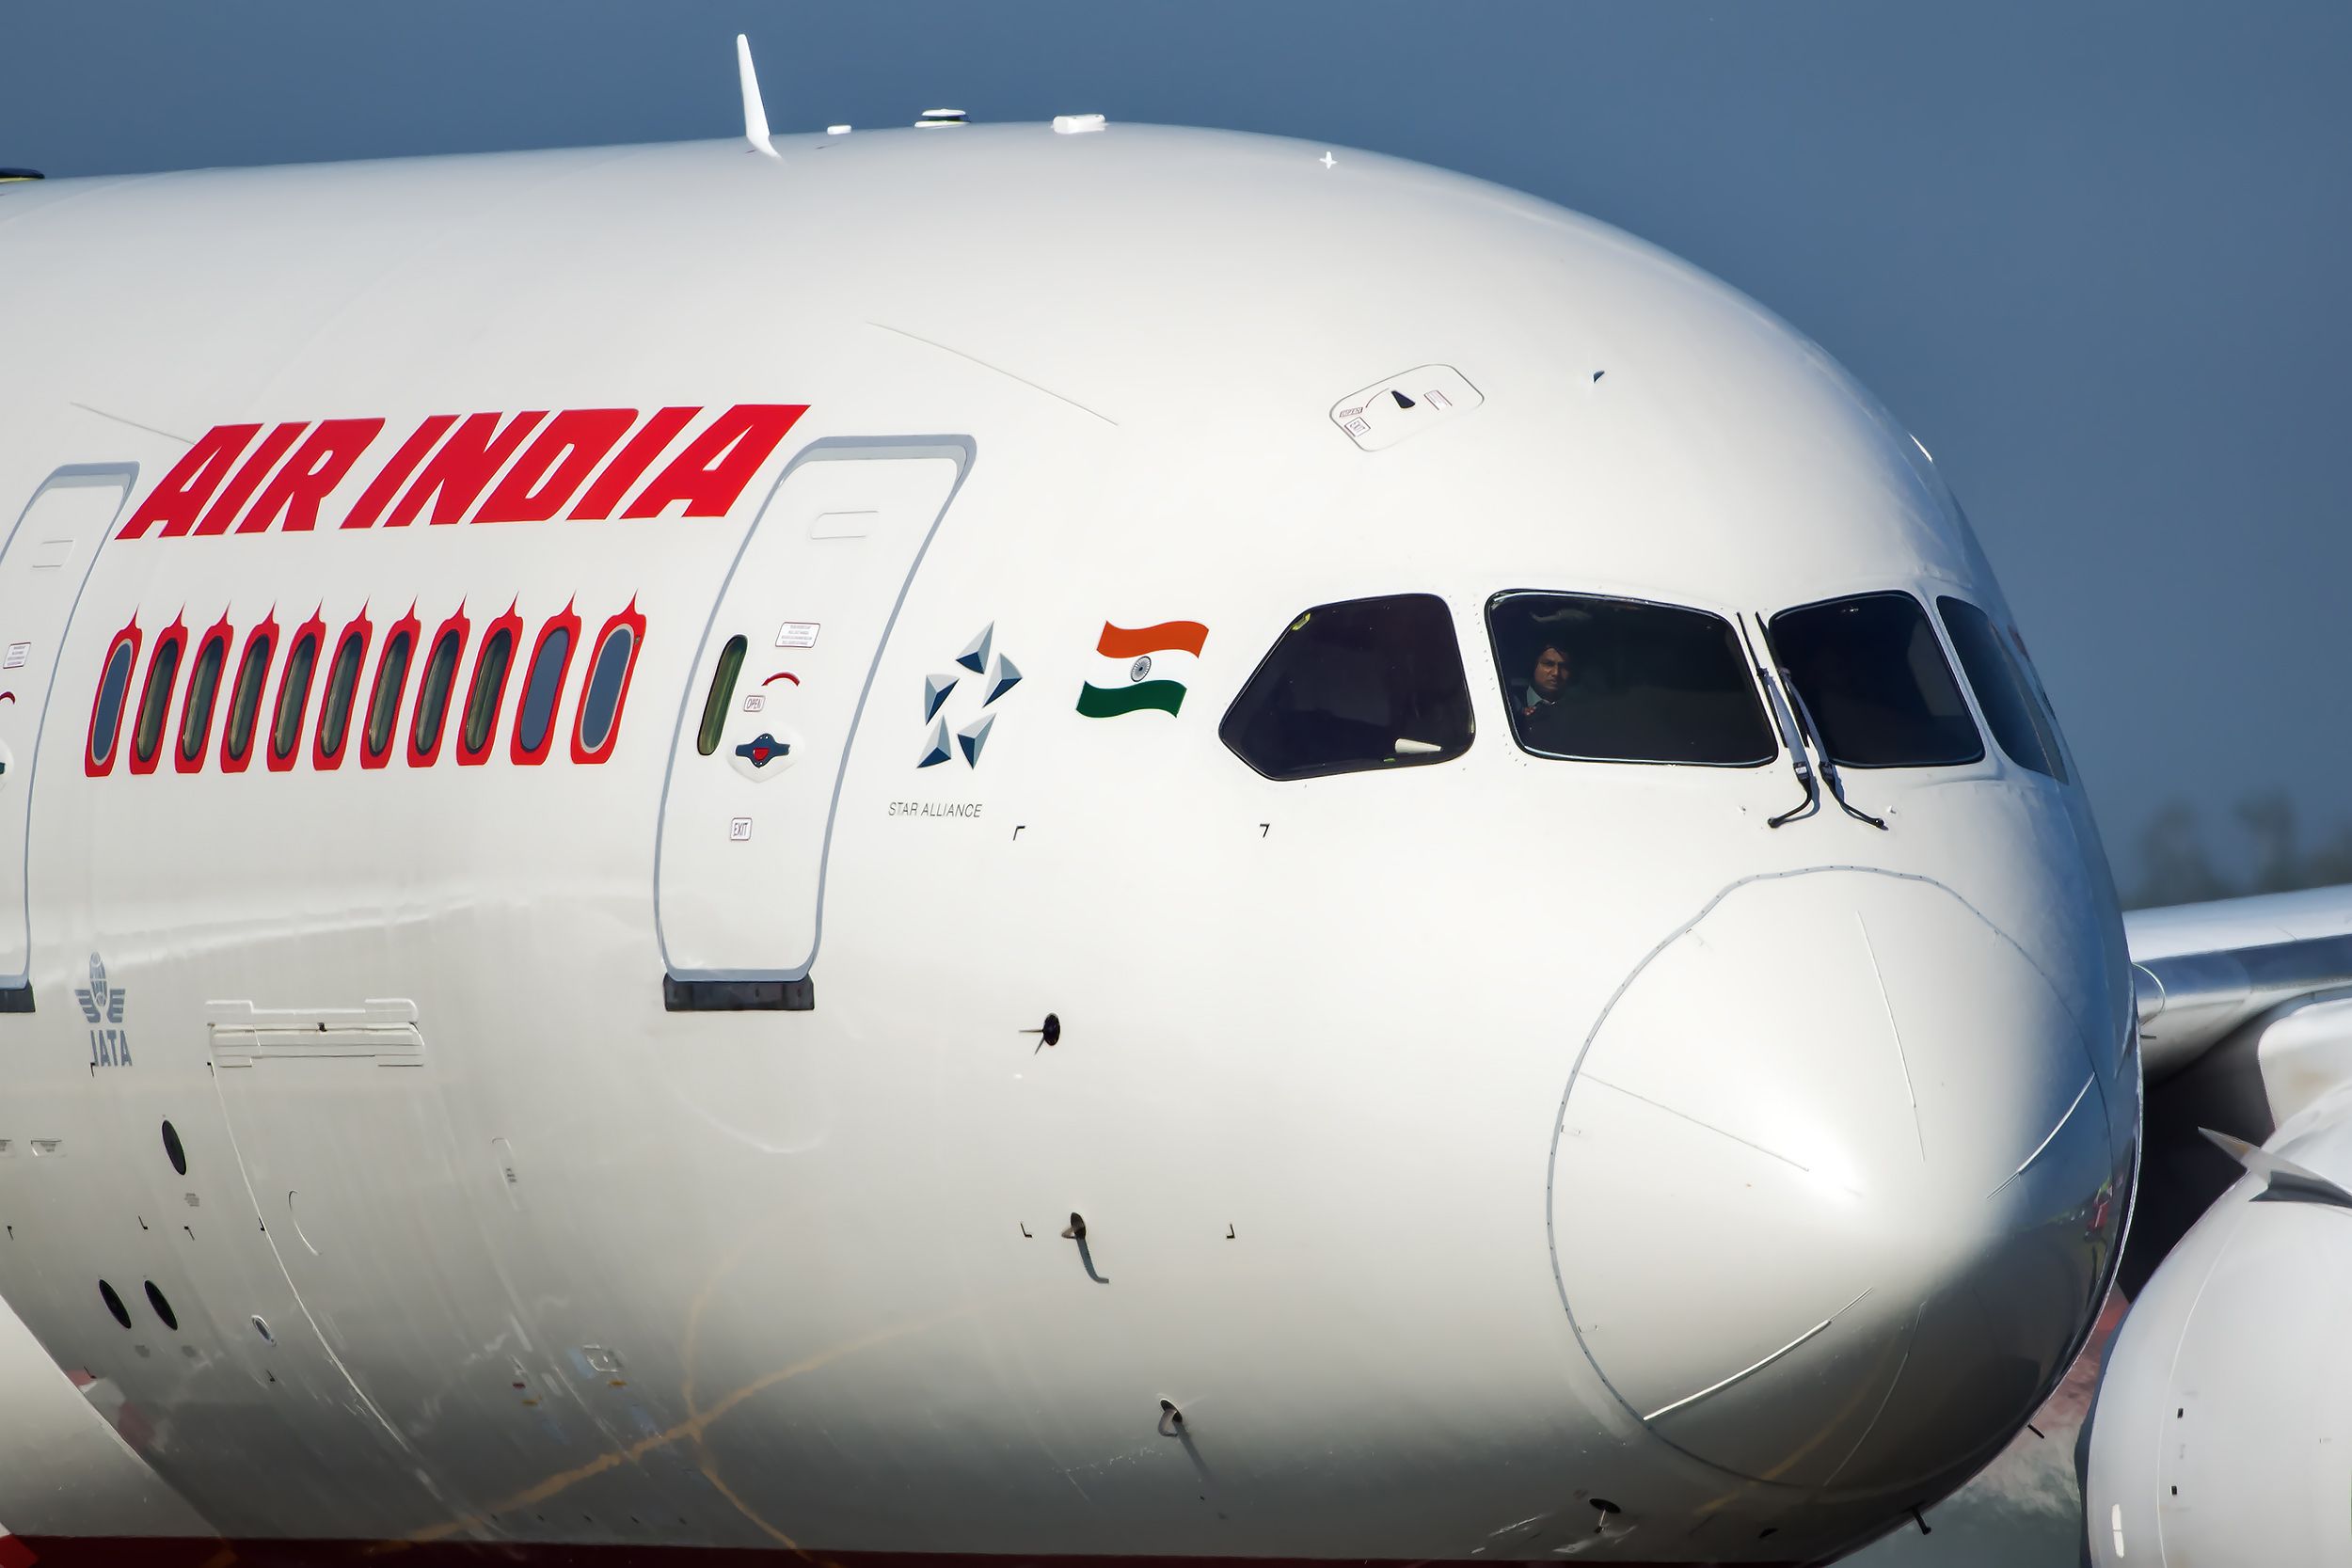 Air India Boeing 787 in Moscow.